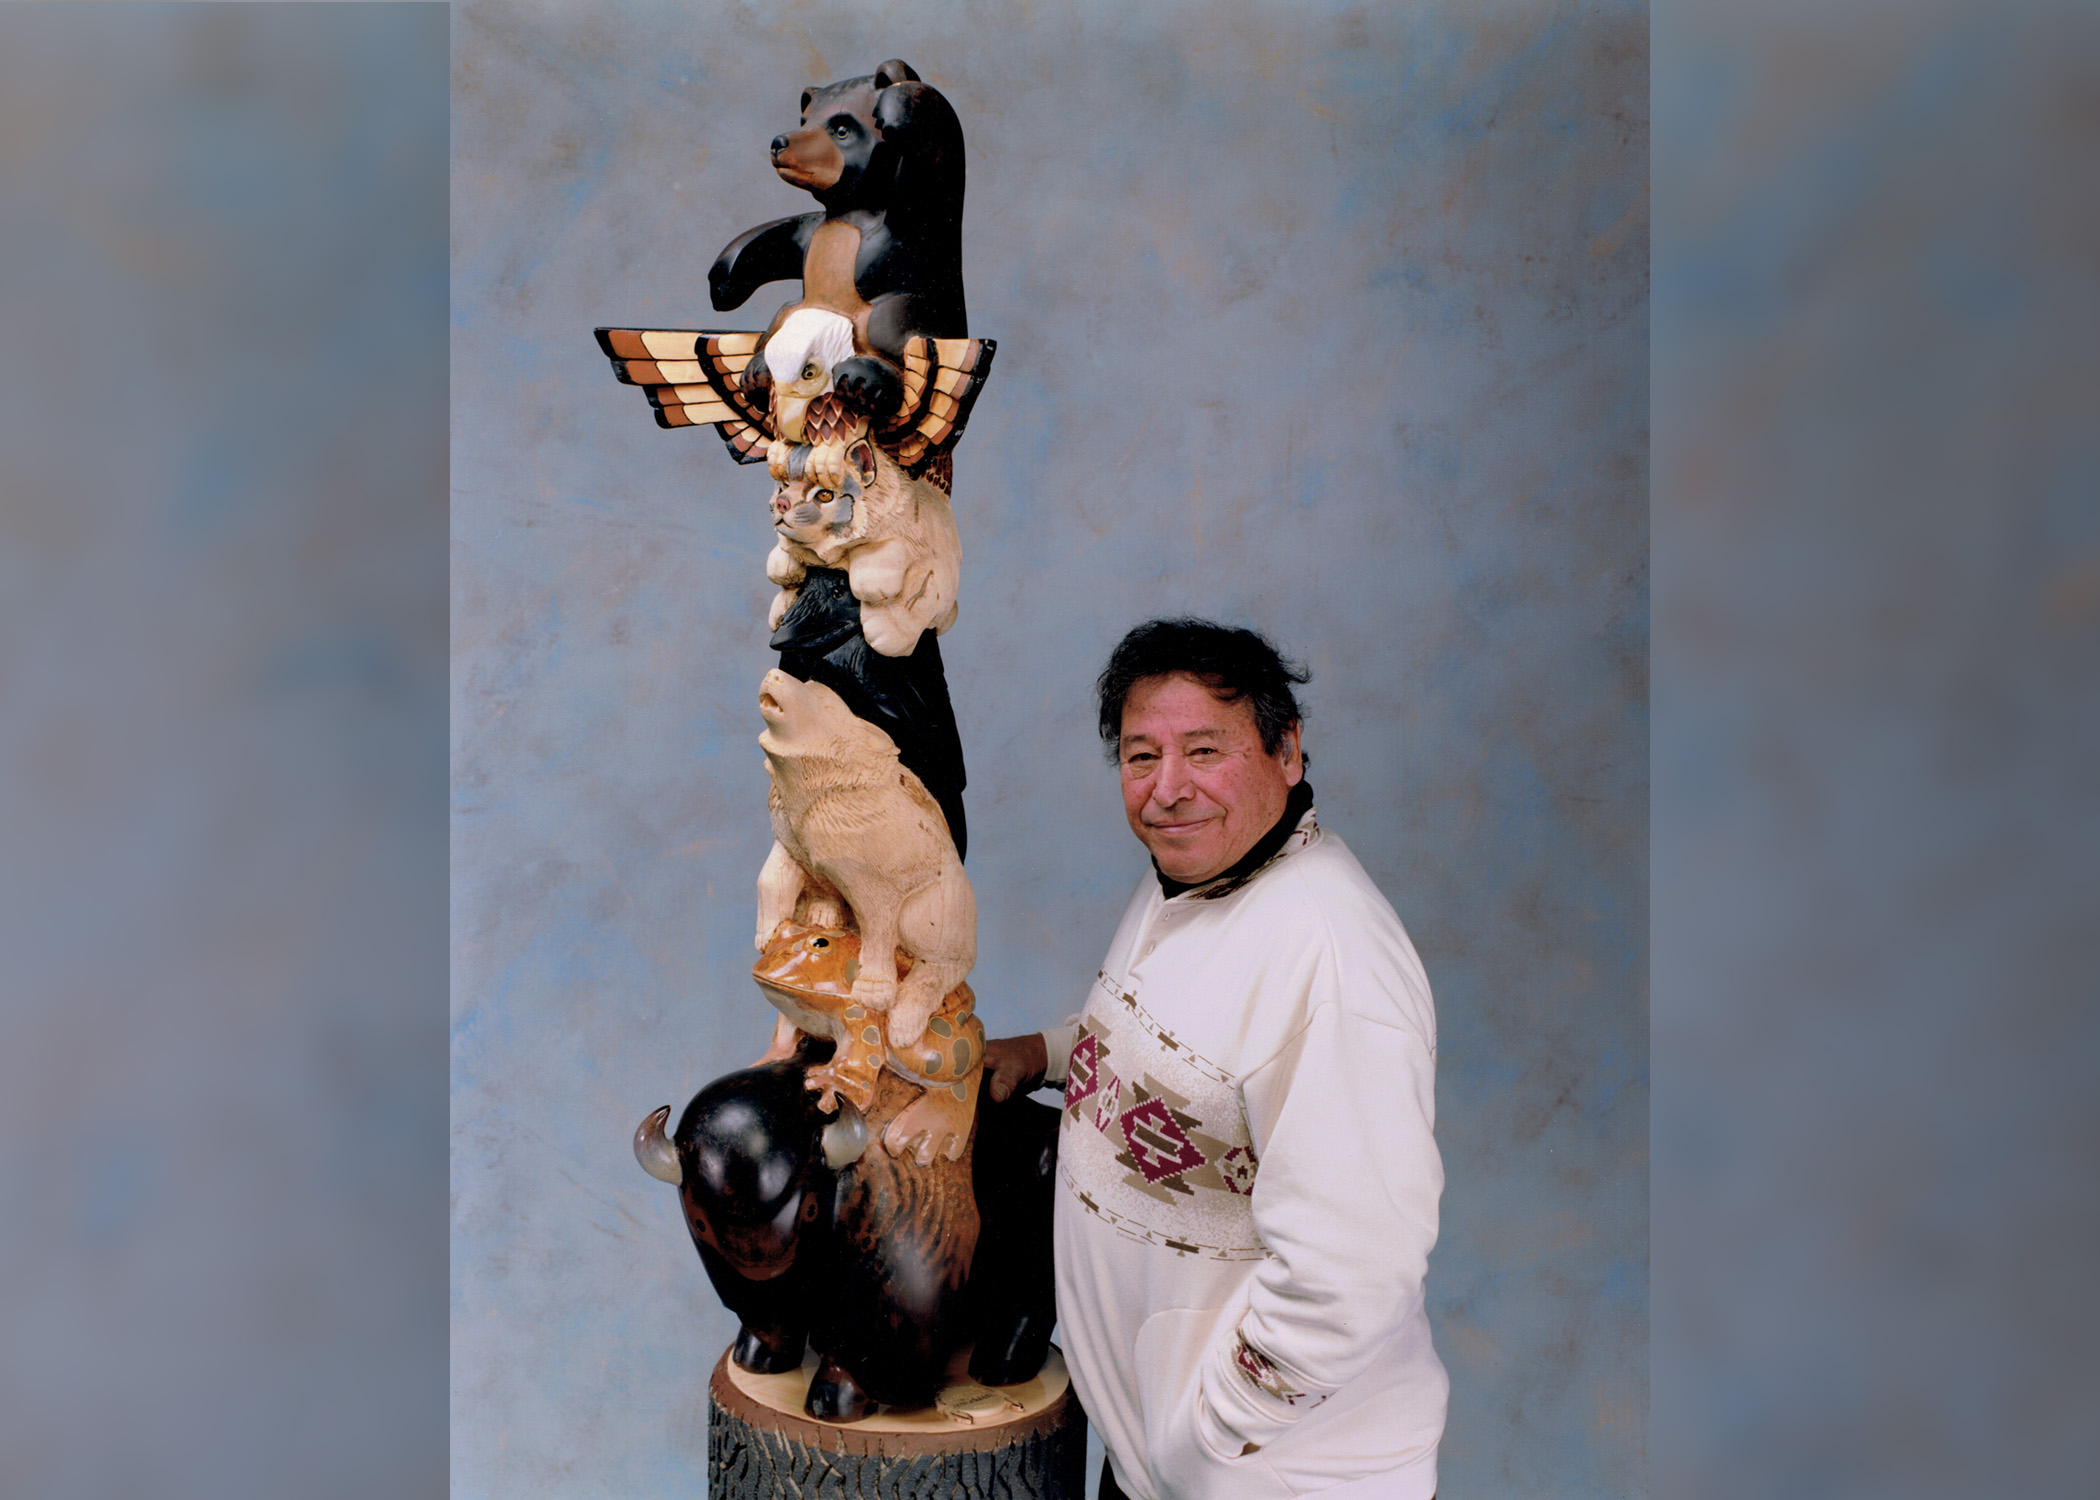 Artist Harry Whitehorse honored with new wood sculpture festival in Monona